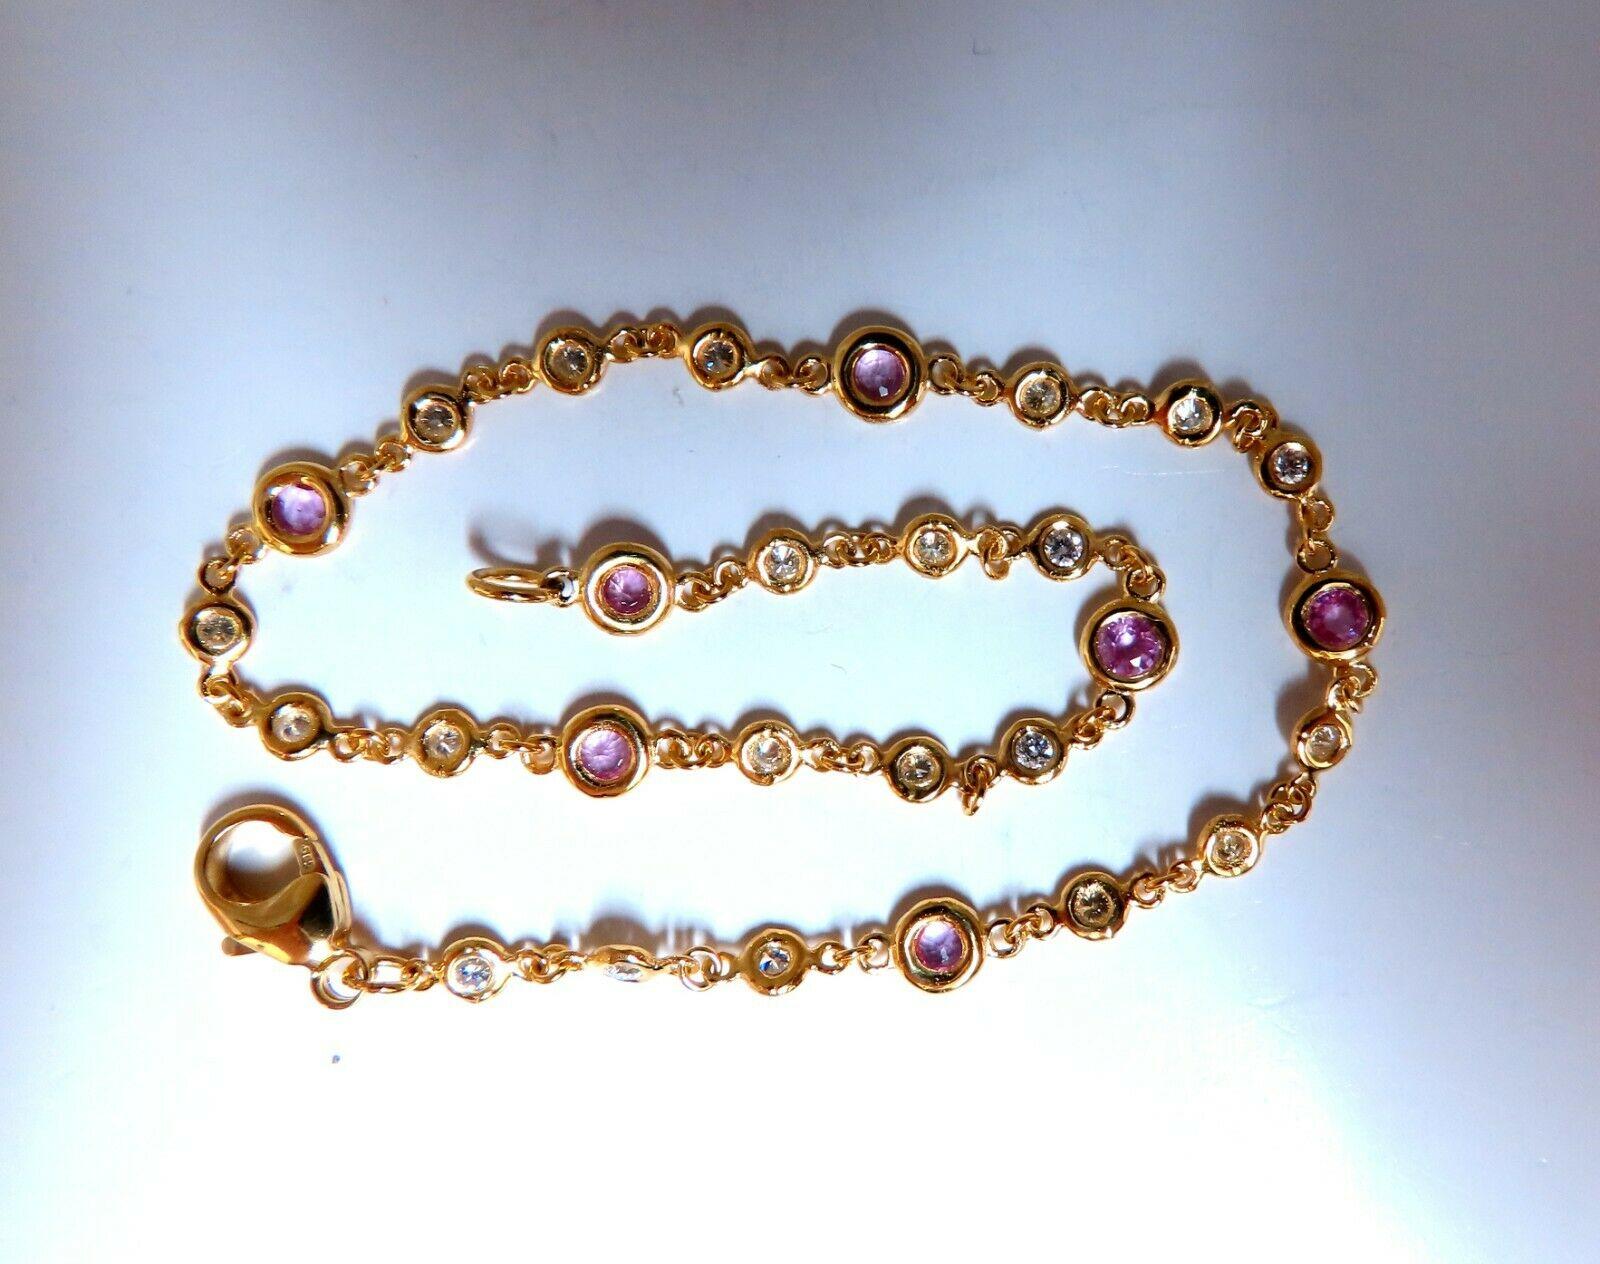 Pink Yard Link Bracelet

1ct. Natural Pink Sapphires

 & .53ct Diamonds bracelet.

Full Round cuts, great sparkle.

Clean Clarity & Transparent.

Vivid Pinks and Prime Saturation.

Round Brilliant Diamonds: G-color Vs-2 clarity.

Secure pressure